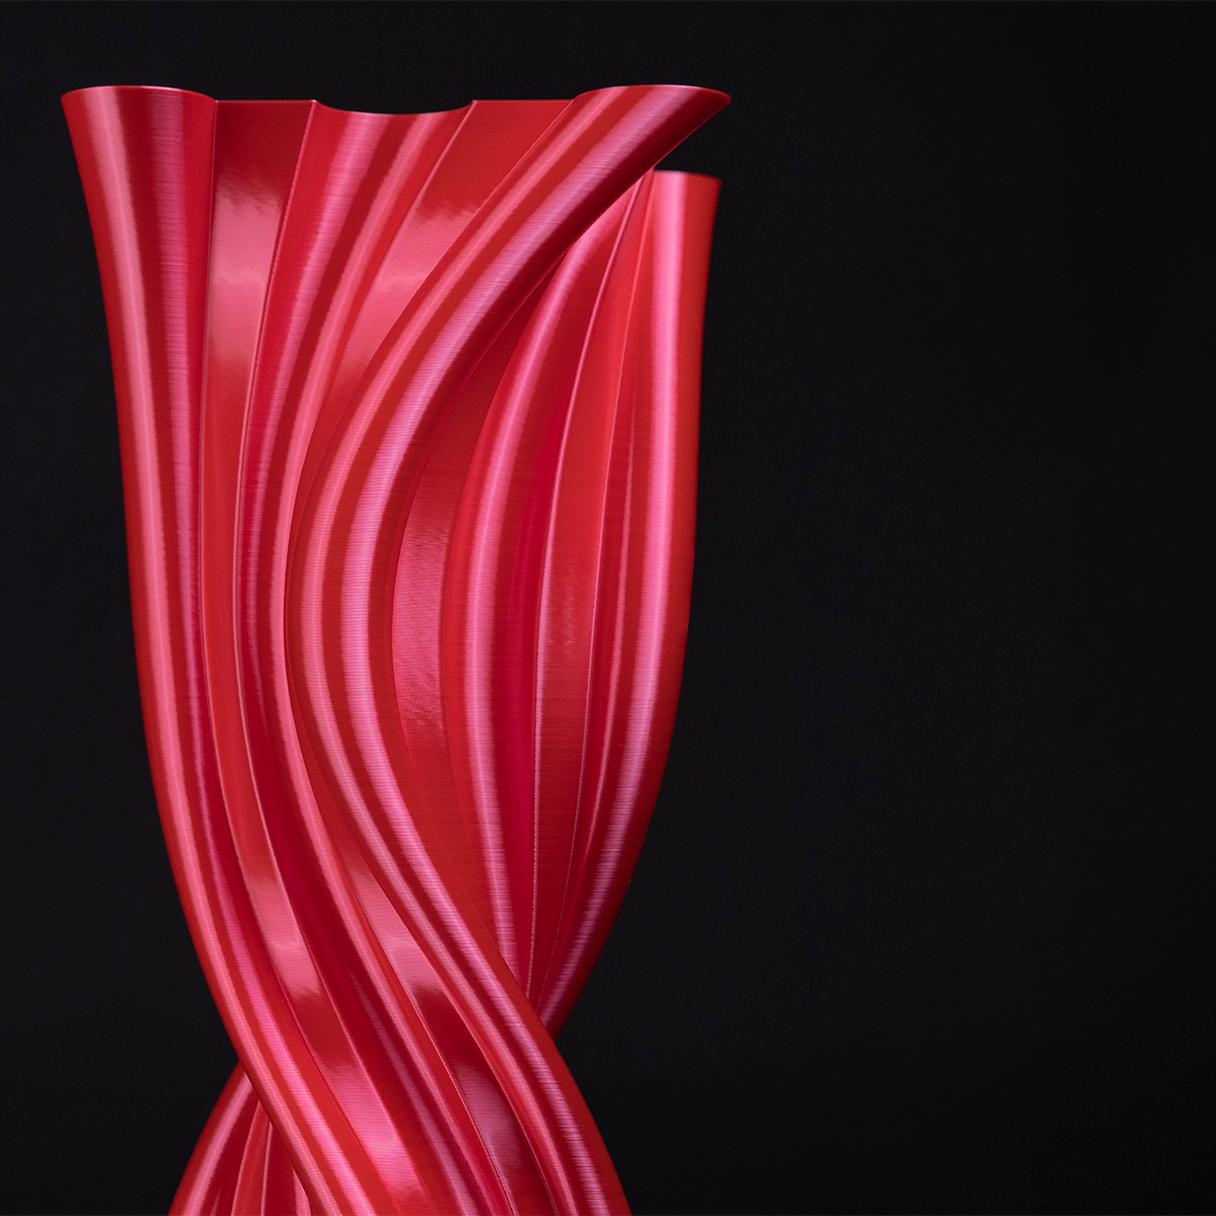 Tersicore, Red Contemporary Sustainable Vase-Sculpture In New Condition For Sale In Livorno, LI